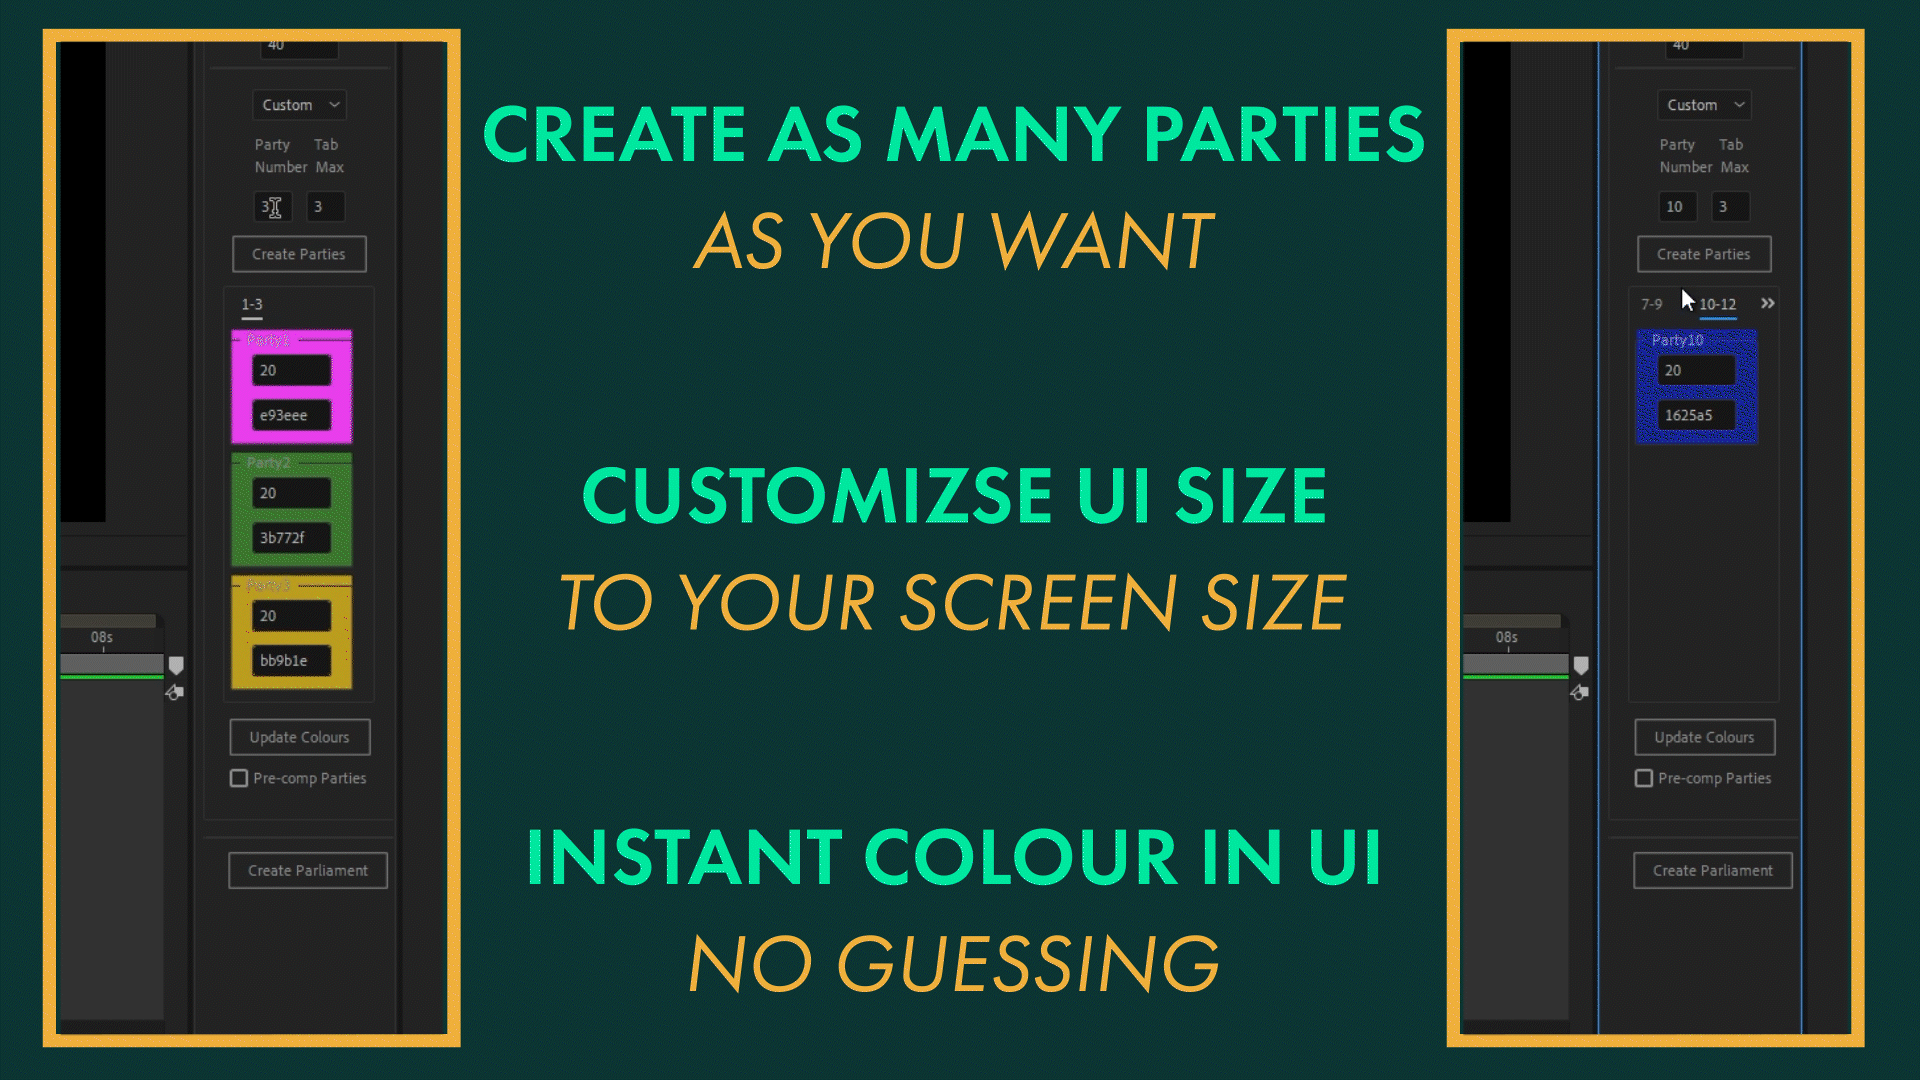 Create as many parties as you want, customise UI size and colour